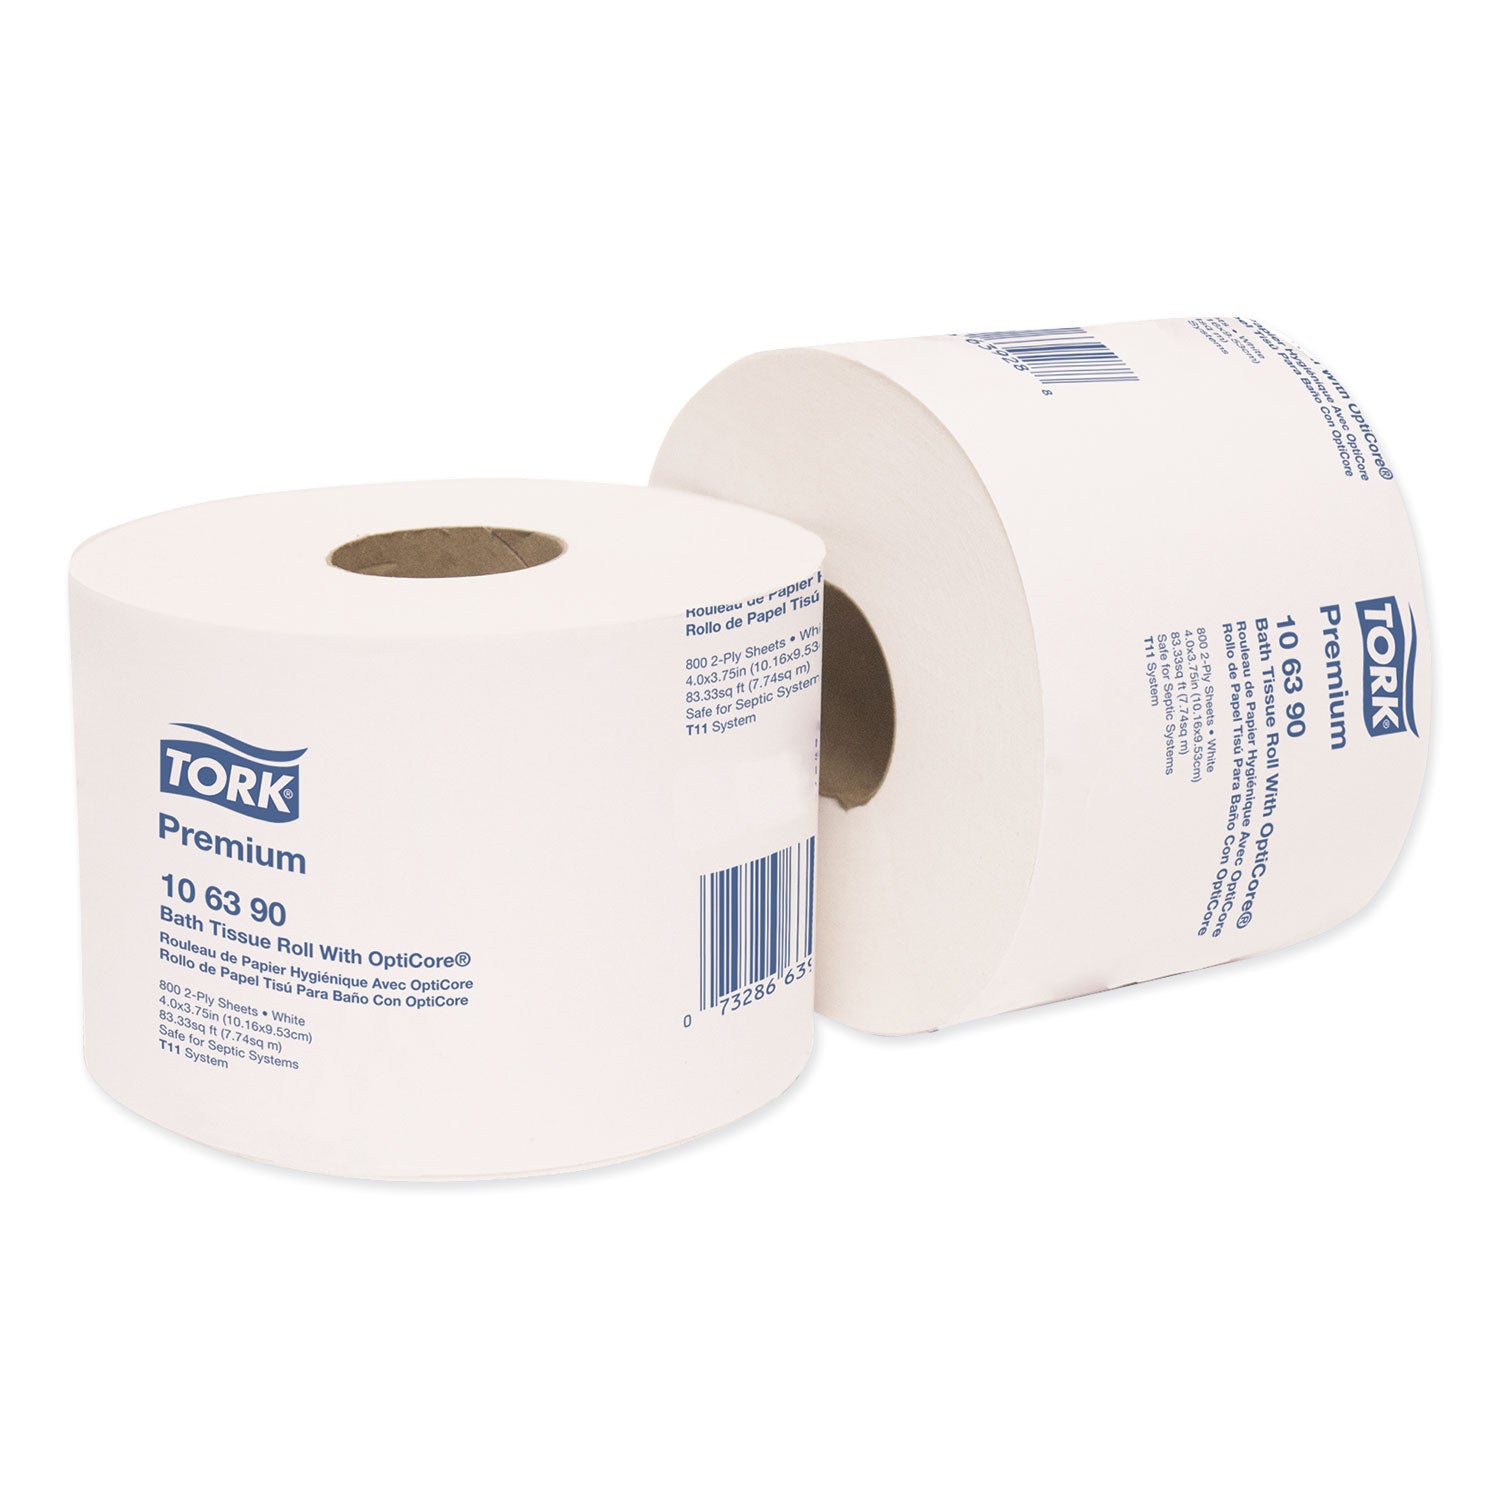 premium-bath-tissue-roll-with-opticore-septic-safe-2-ply-white-800-sheets-roll-36-carton_trk106390 - 2